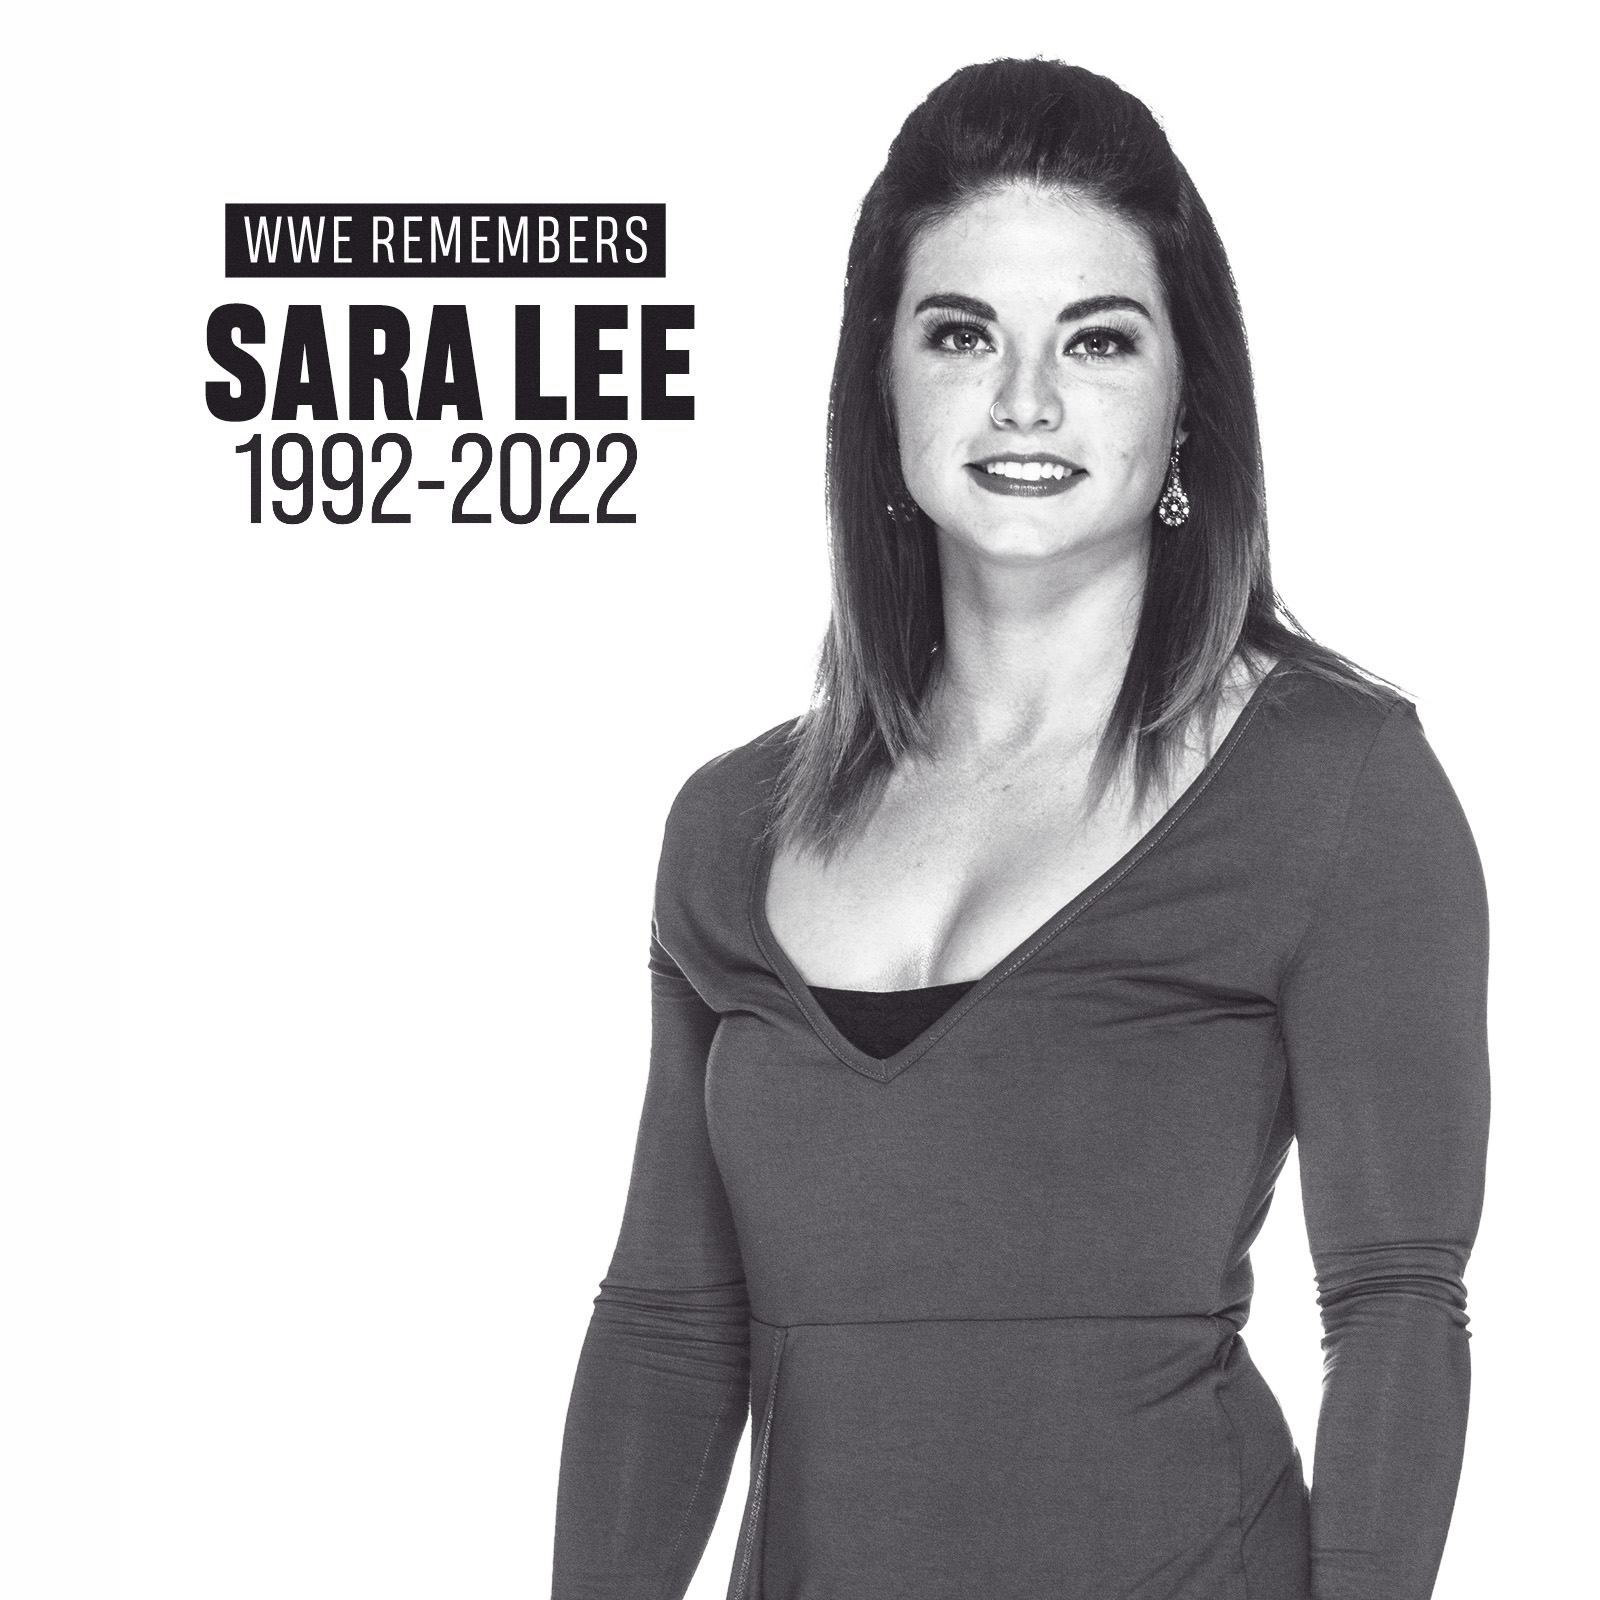 WWE on X: WWE is saddened to learn of the passing of Sara Lee. As